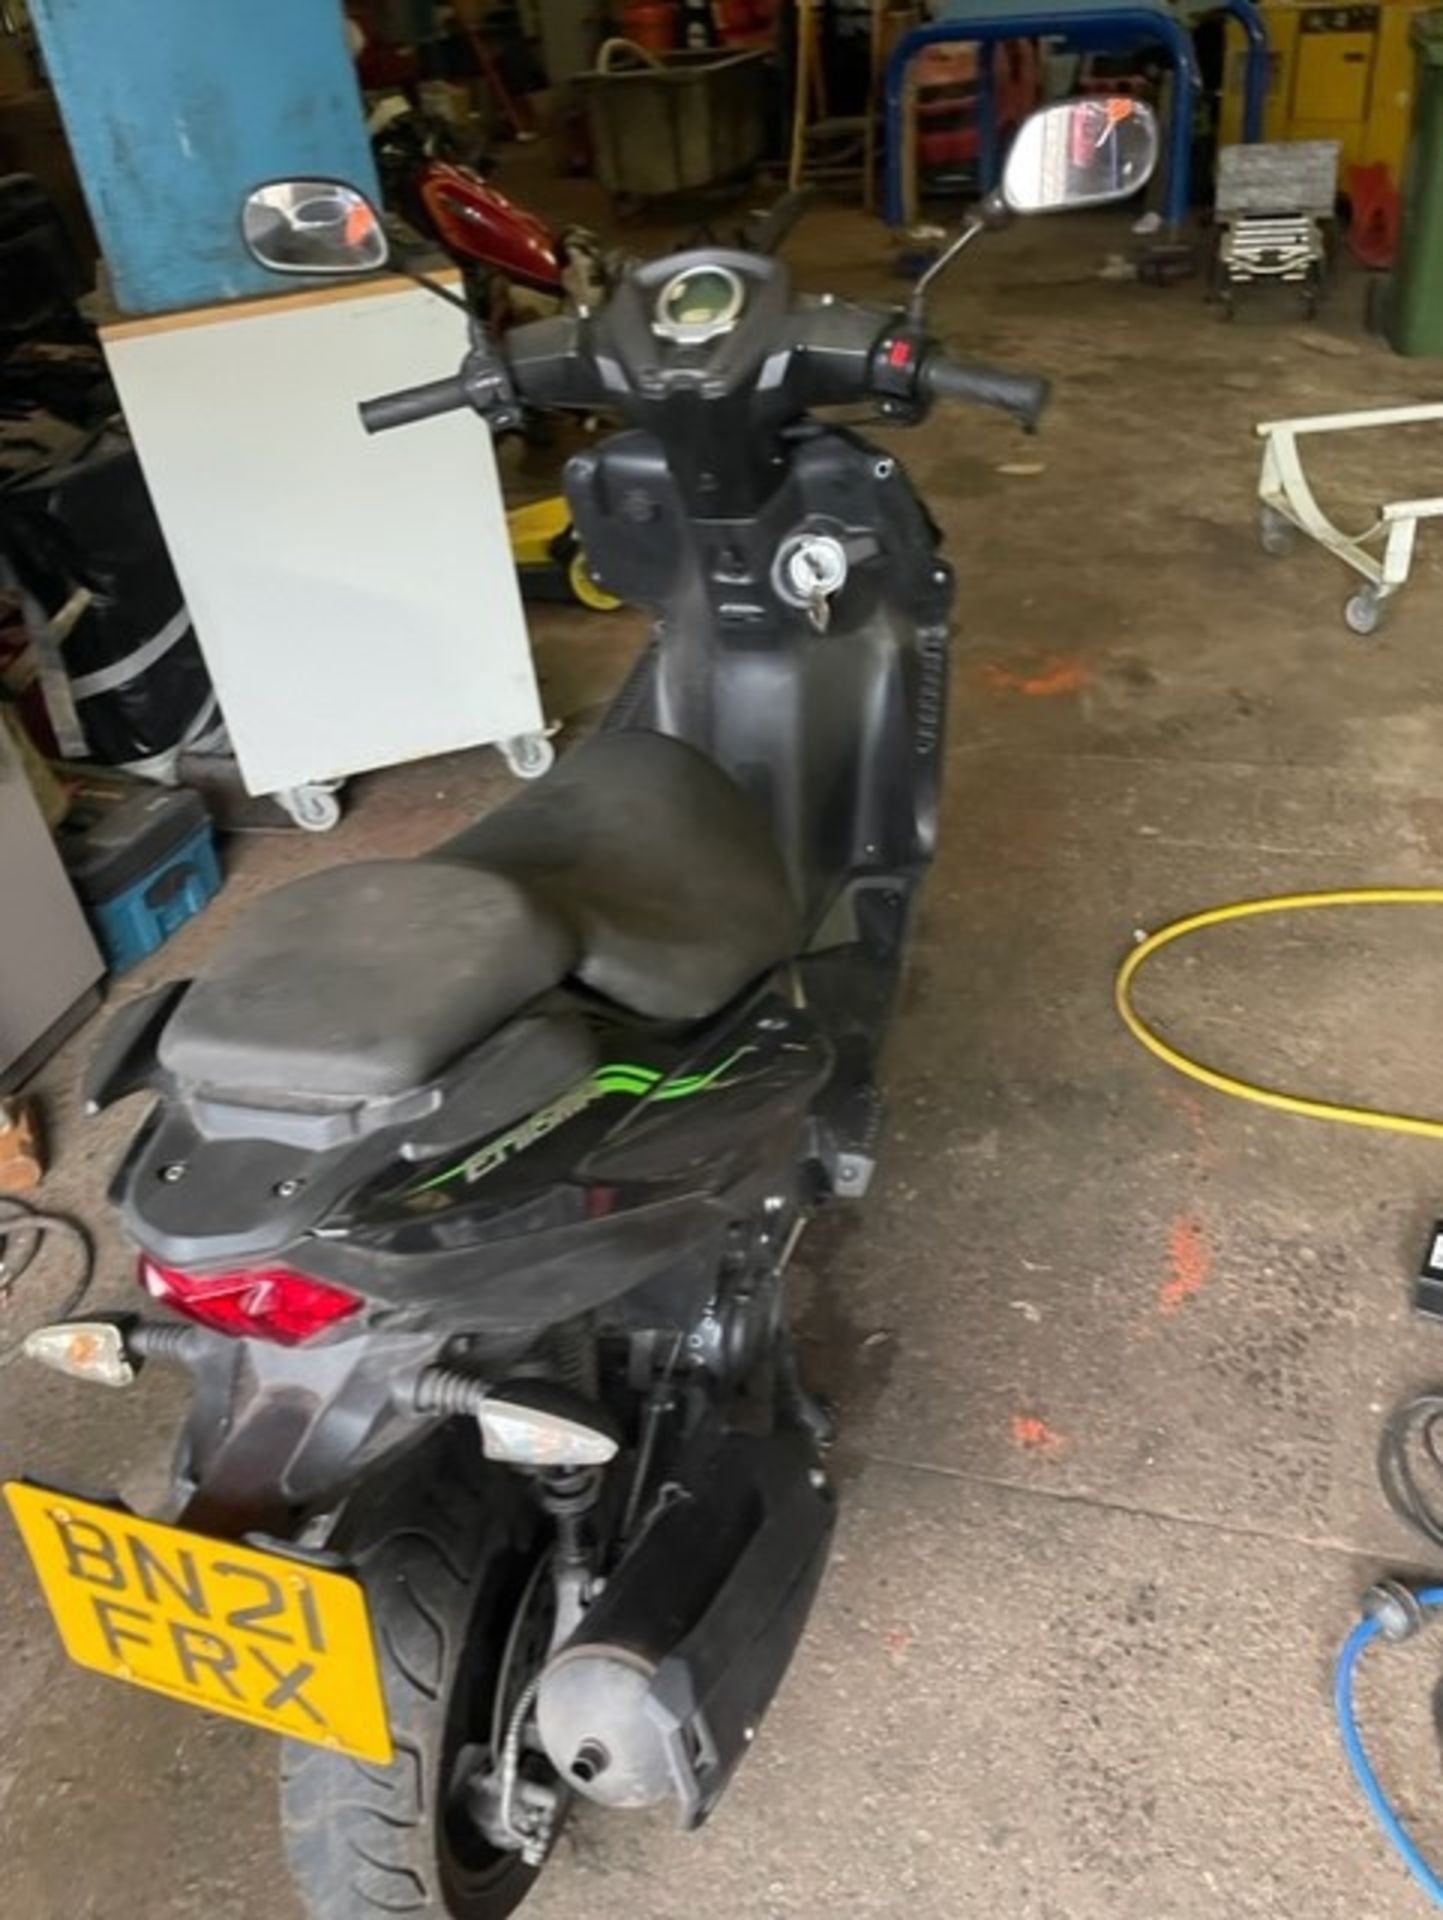 Leximotor 125 scooter it is a crash repair and it’s on a 21 model so still has some test runs as per - Image 3 of 7